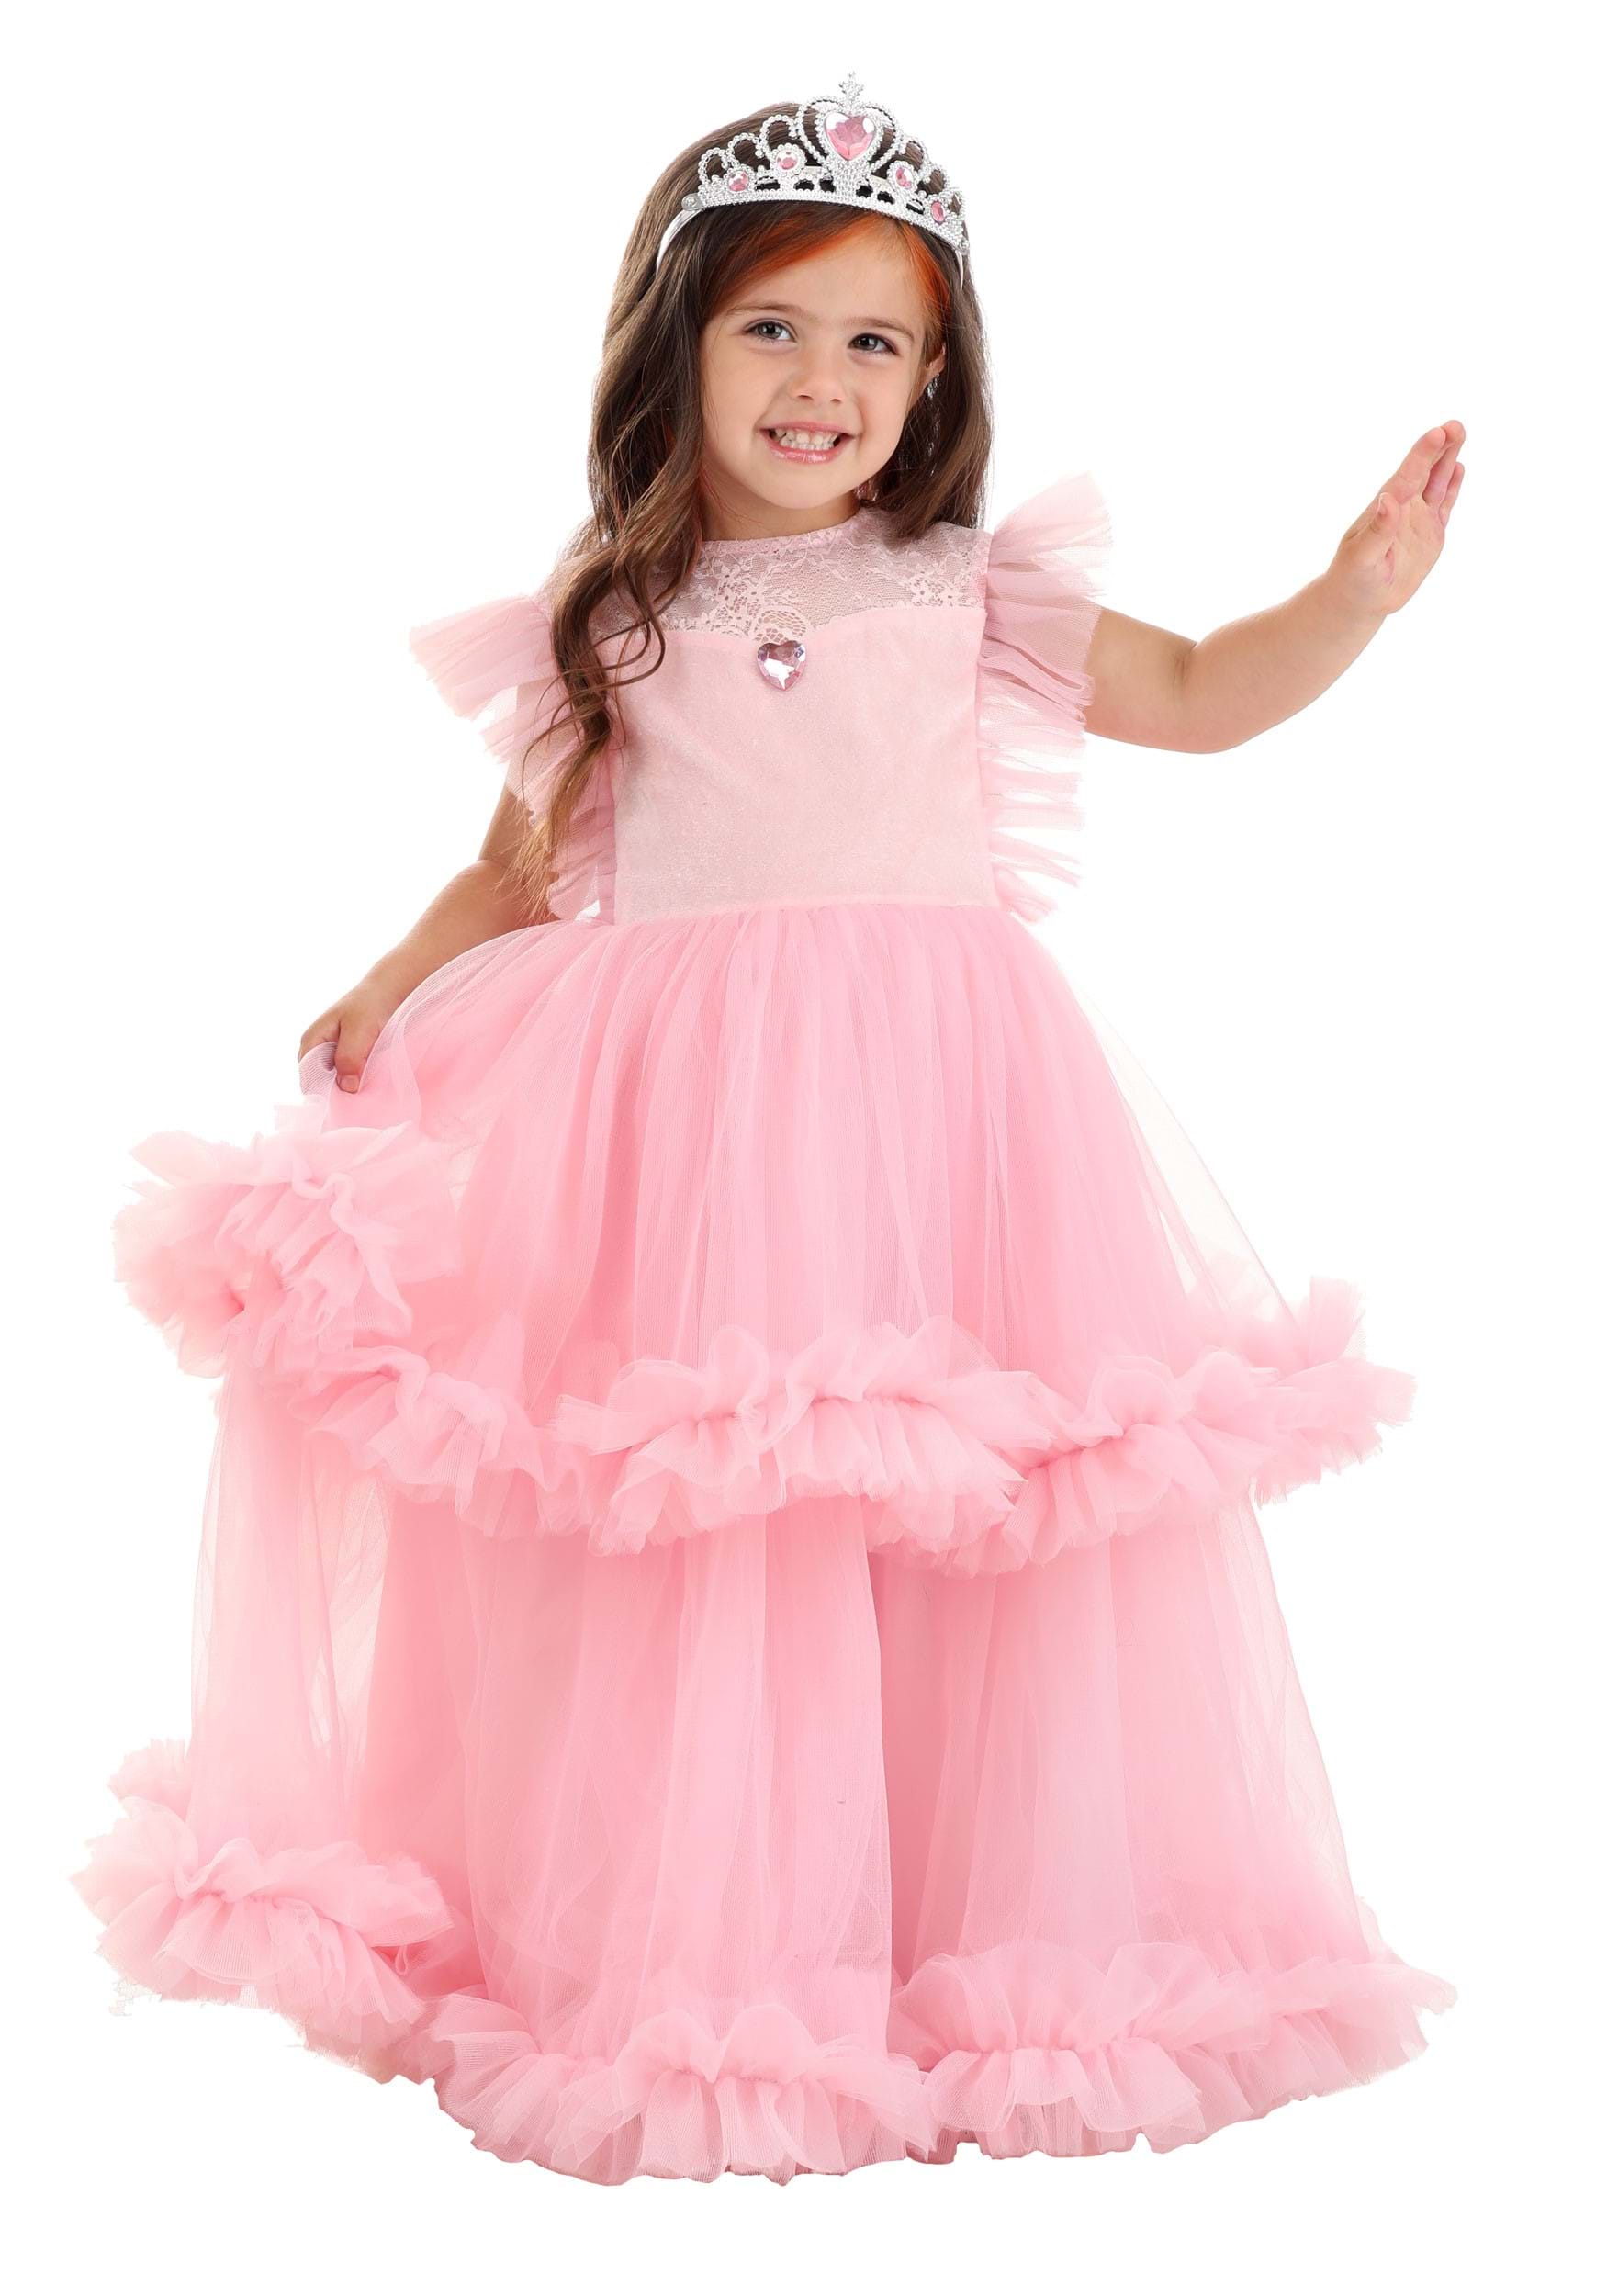 https://images.halloweencostumes.ca/products/87028/1-1/toddler-pretty-in-pink-princess-costume-dress.jpg